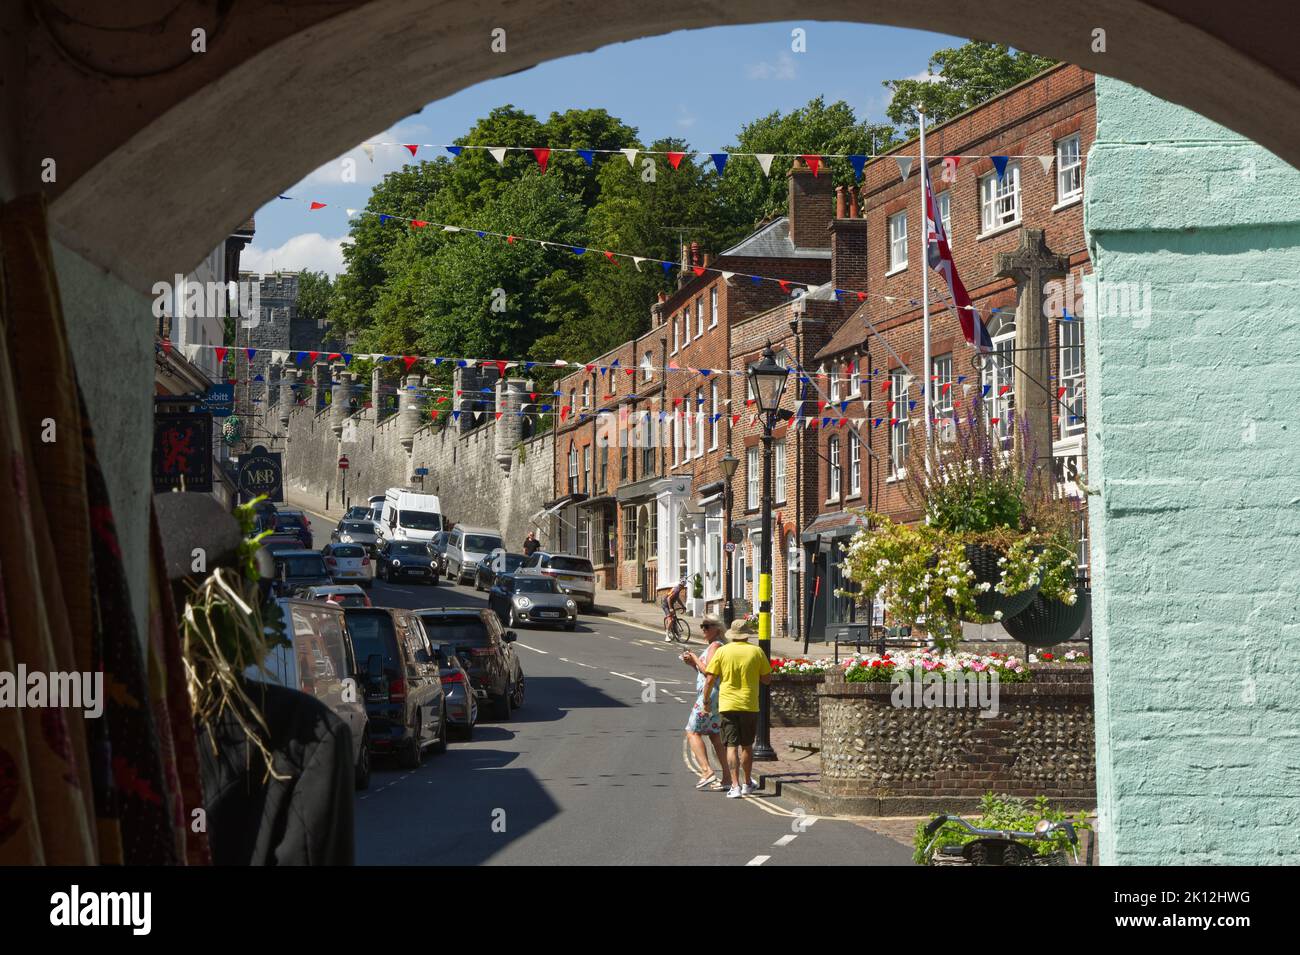 View up the High Street in Arundel, West Sussex, England. With people walking around. Stock Photo